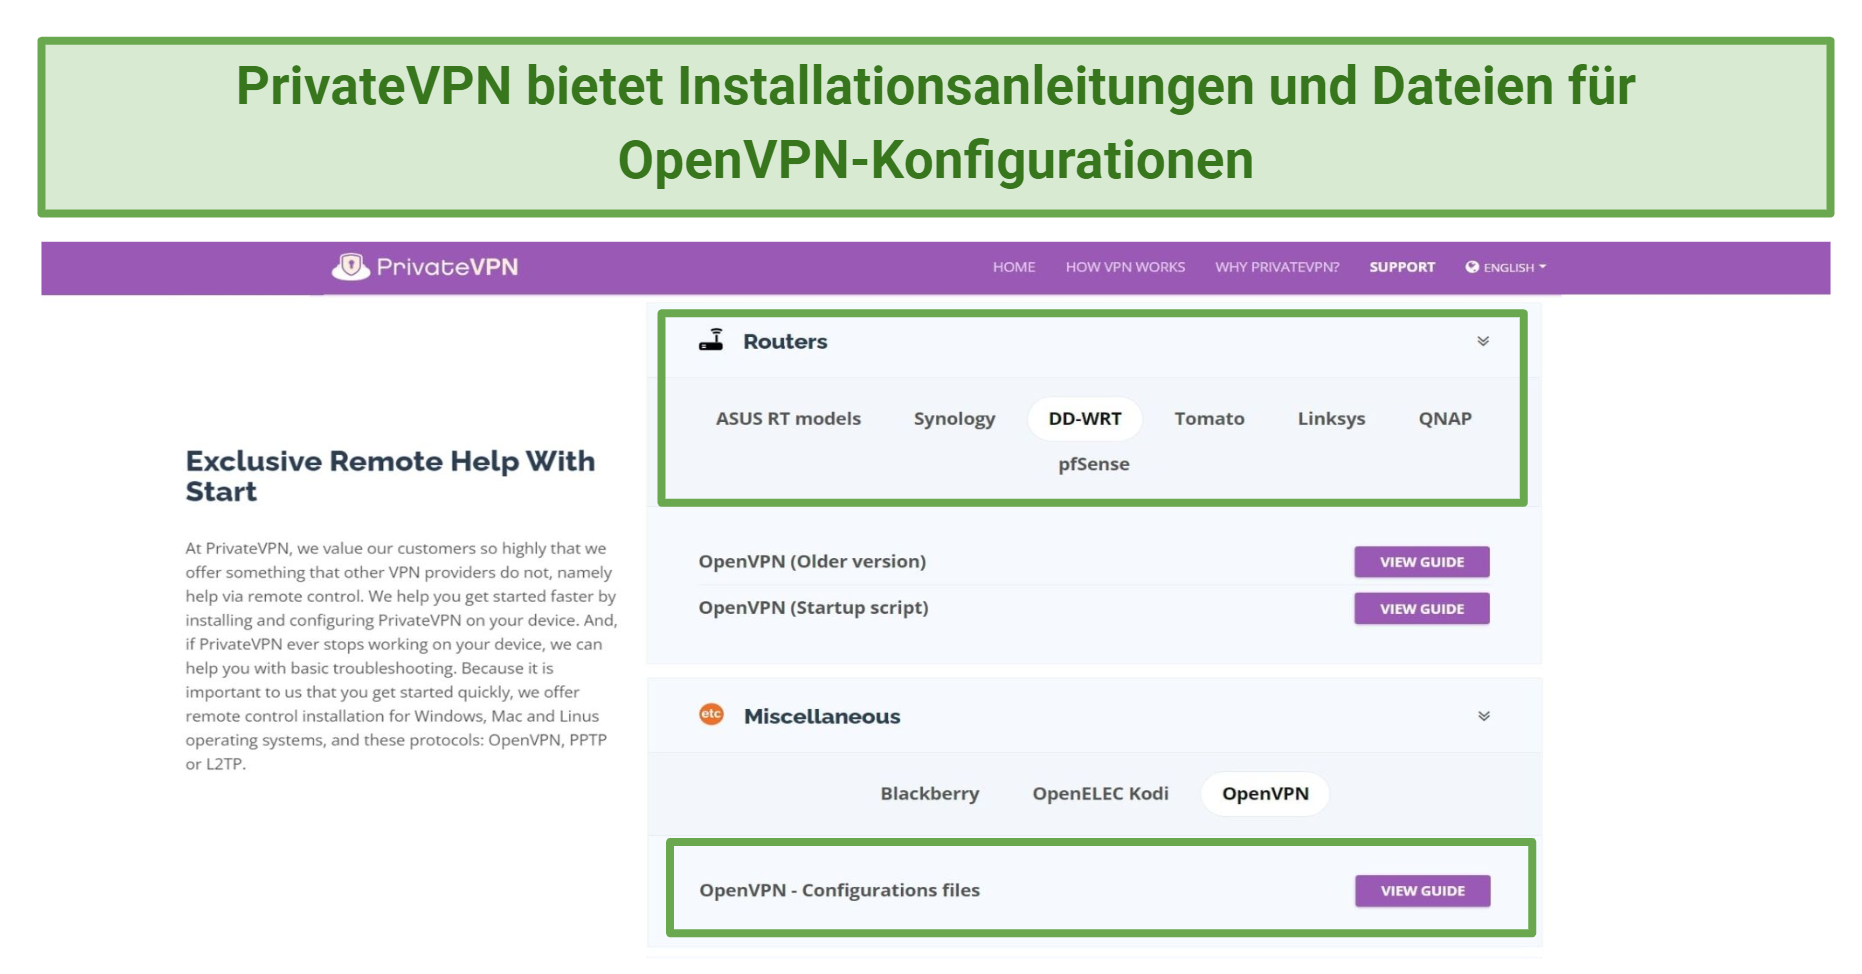 Screenshot of PrivateVPN's support page with configuration files